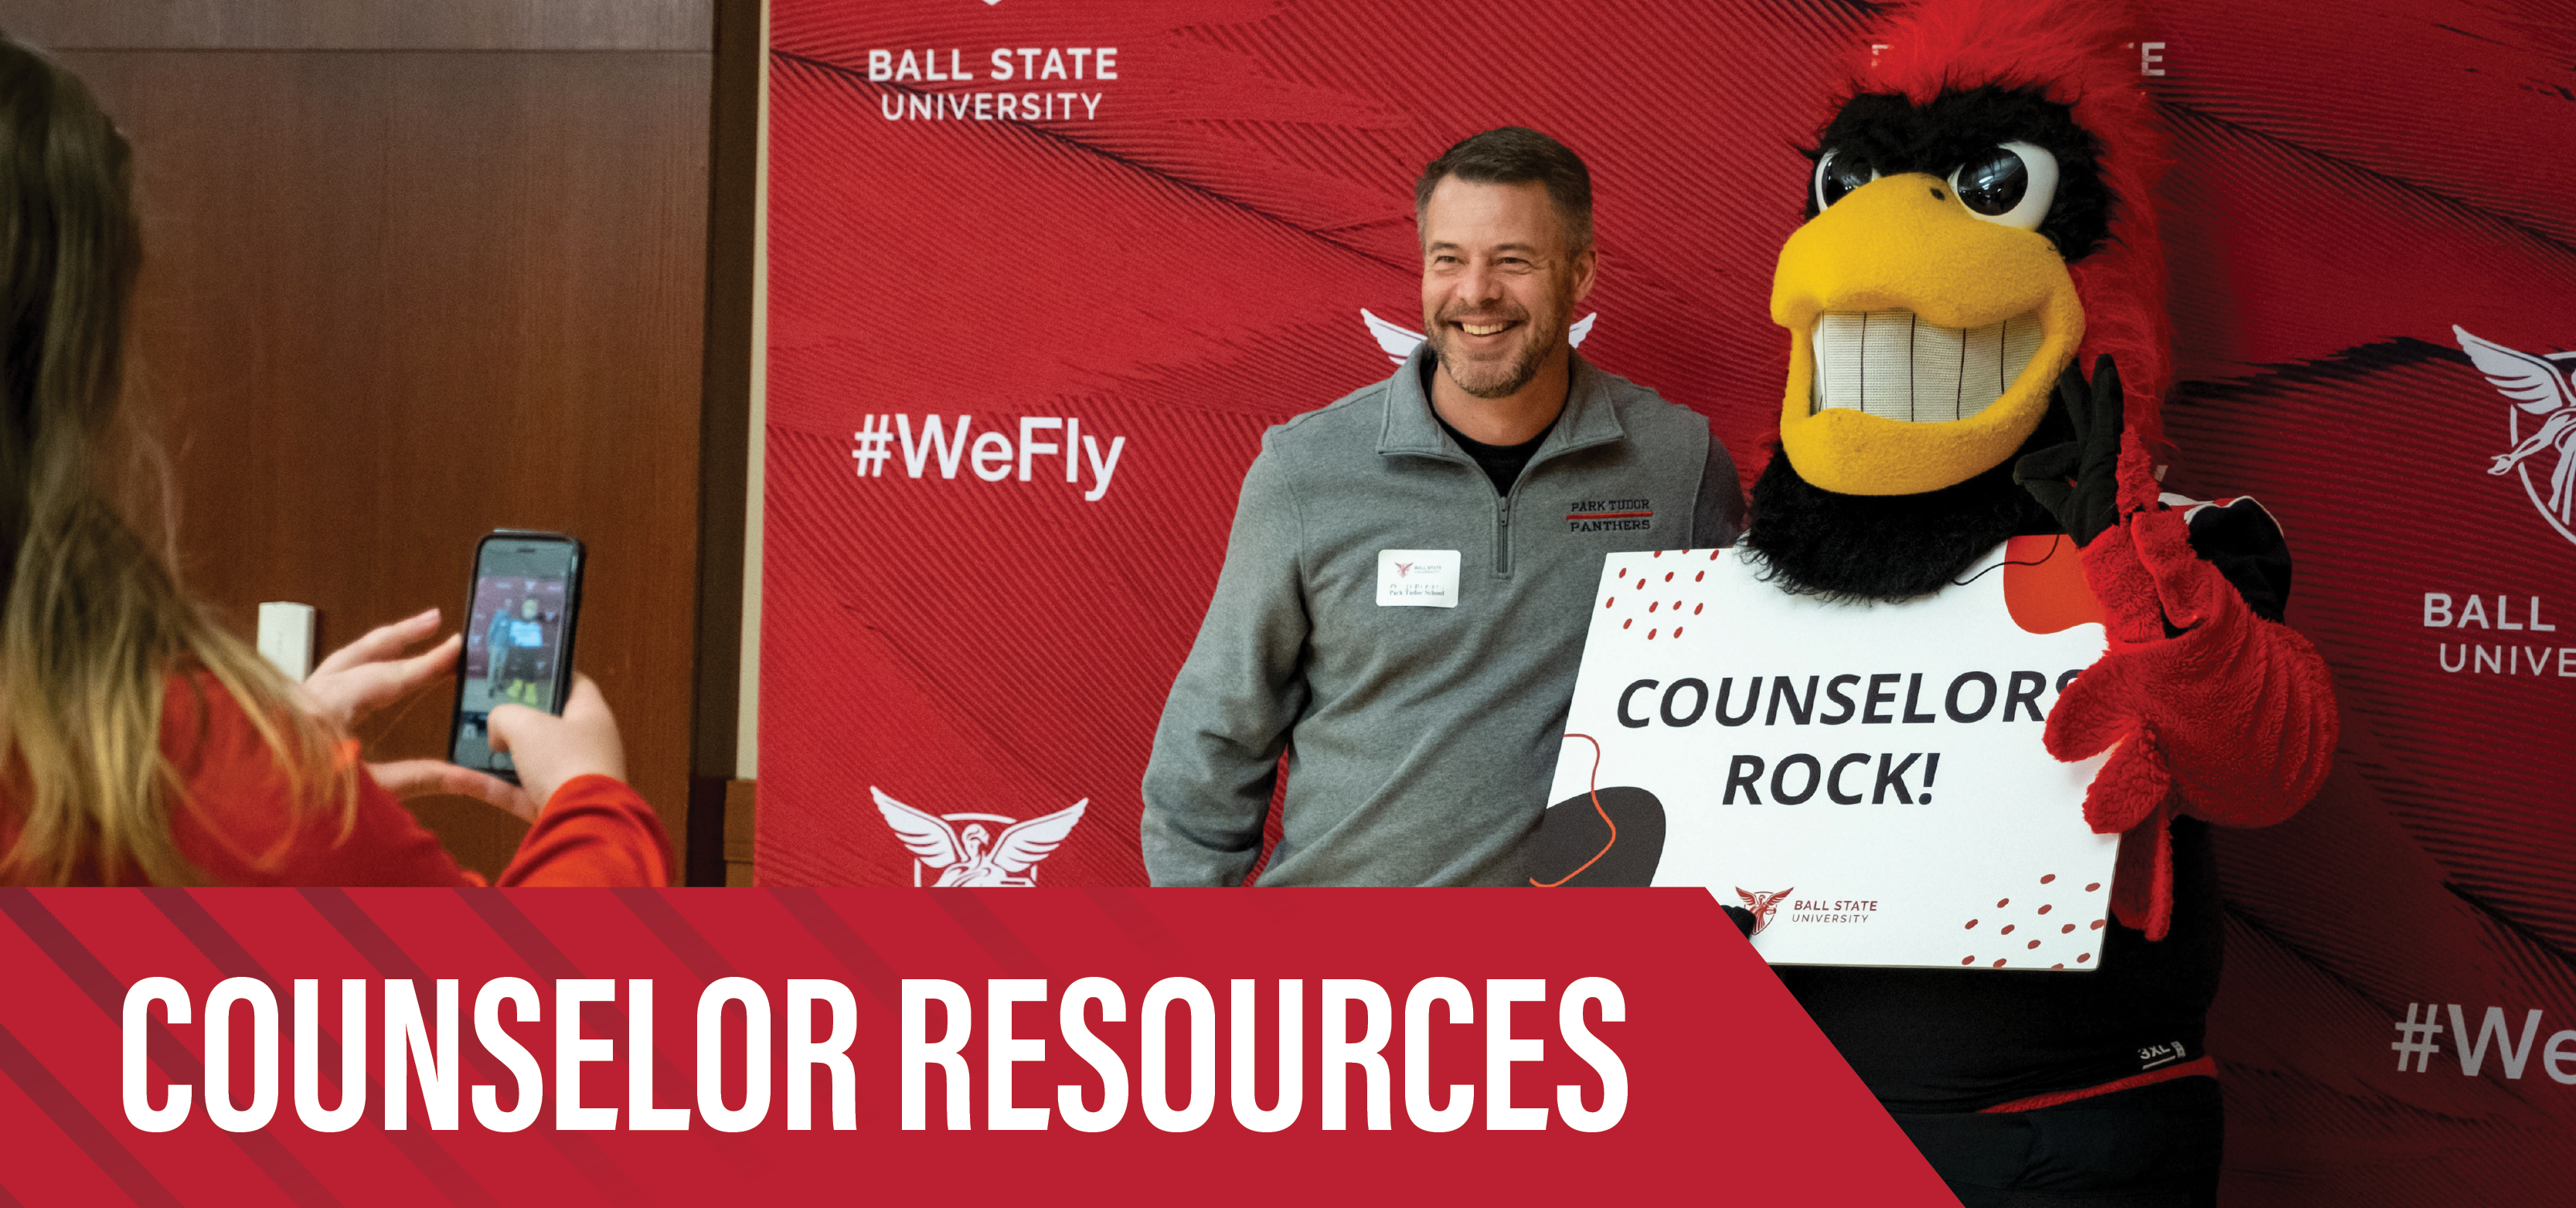 A high school counselor takes a photo with Charlie Cardinal during Counselor Connection Day at Ball State University.